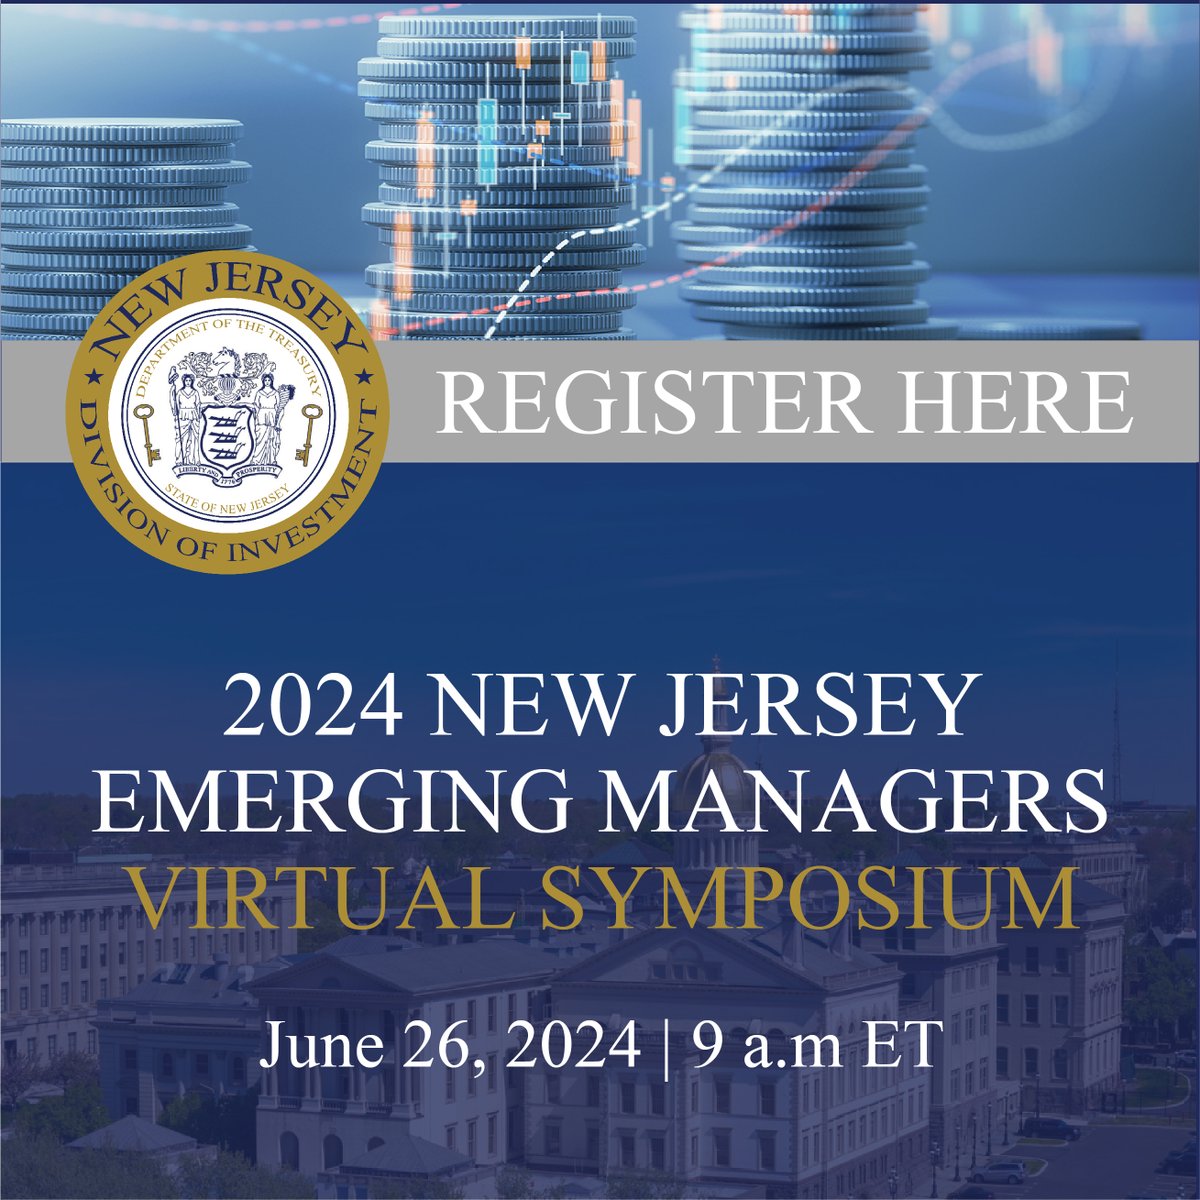 Registration for the New Jersey Division of Investment’s Emerging Manager Virtual Symposium is now available. Register now at njdoi-em24.vfairs.com.